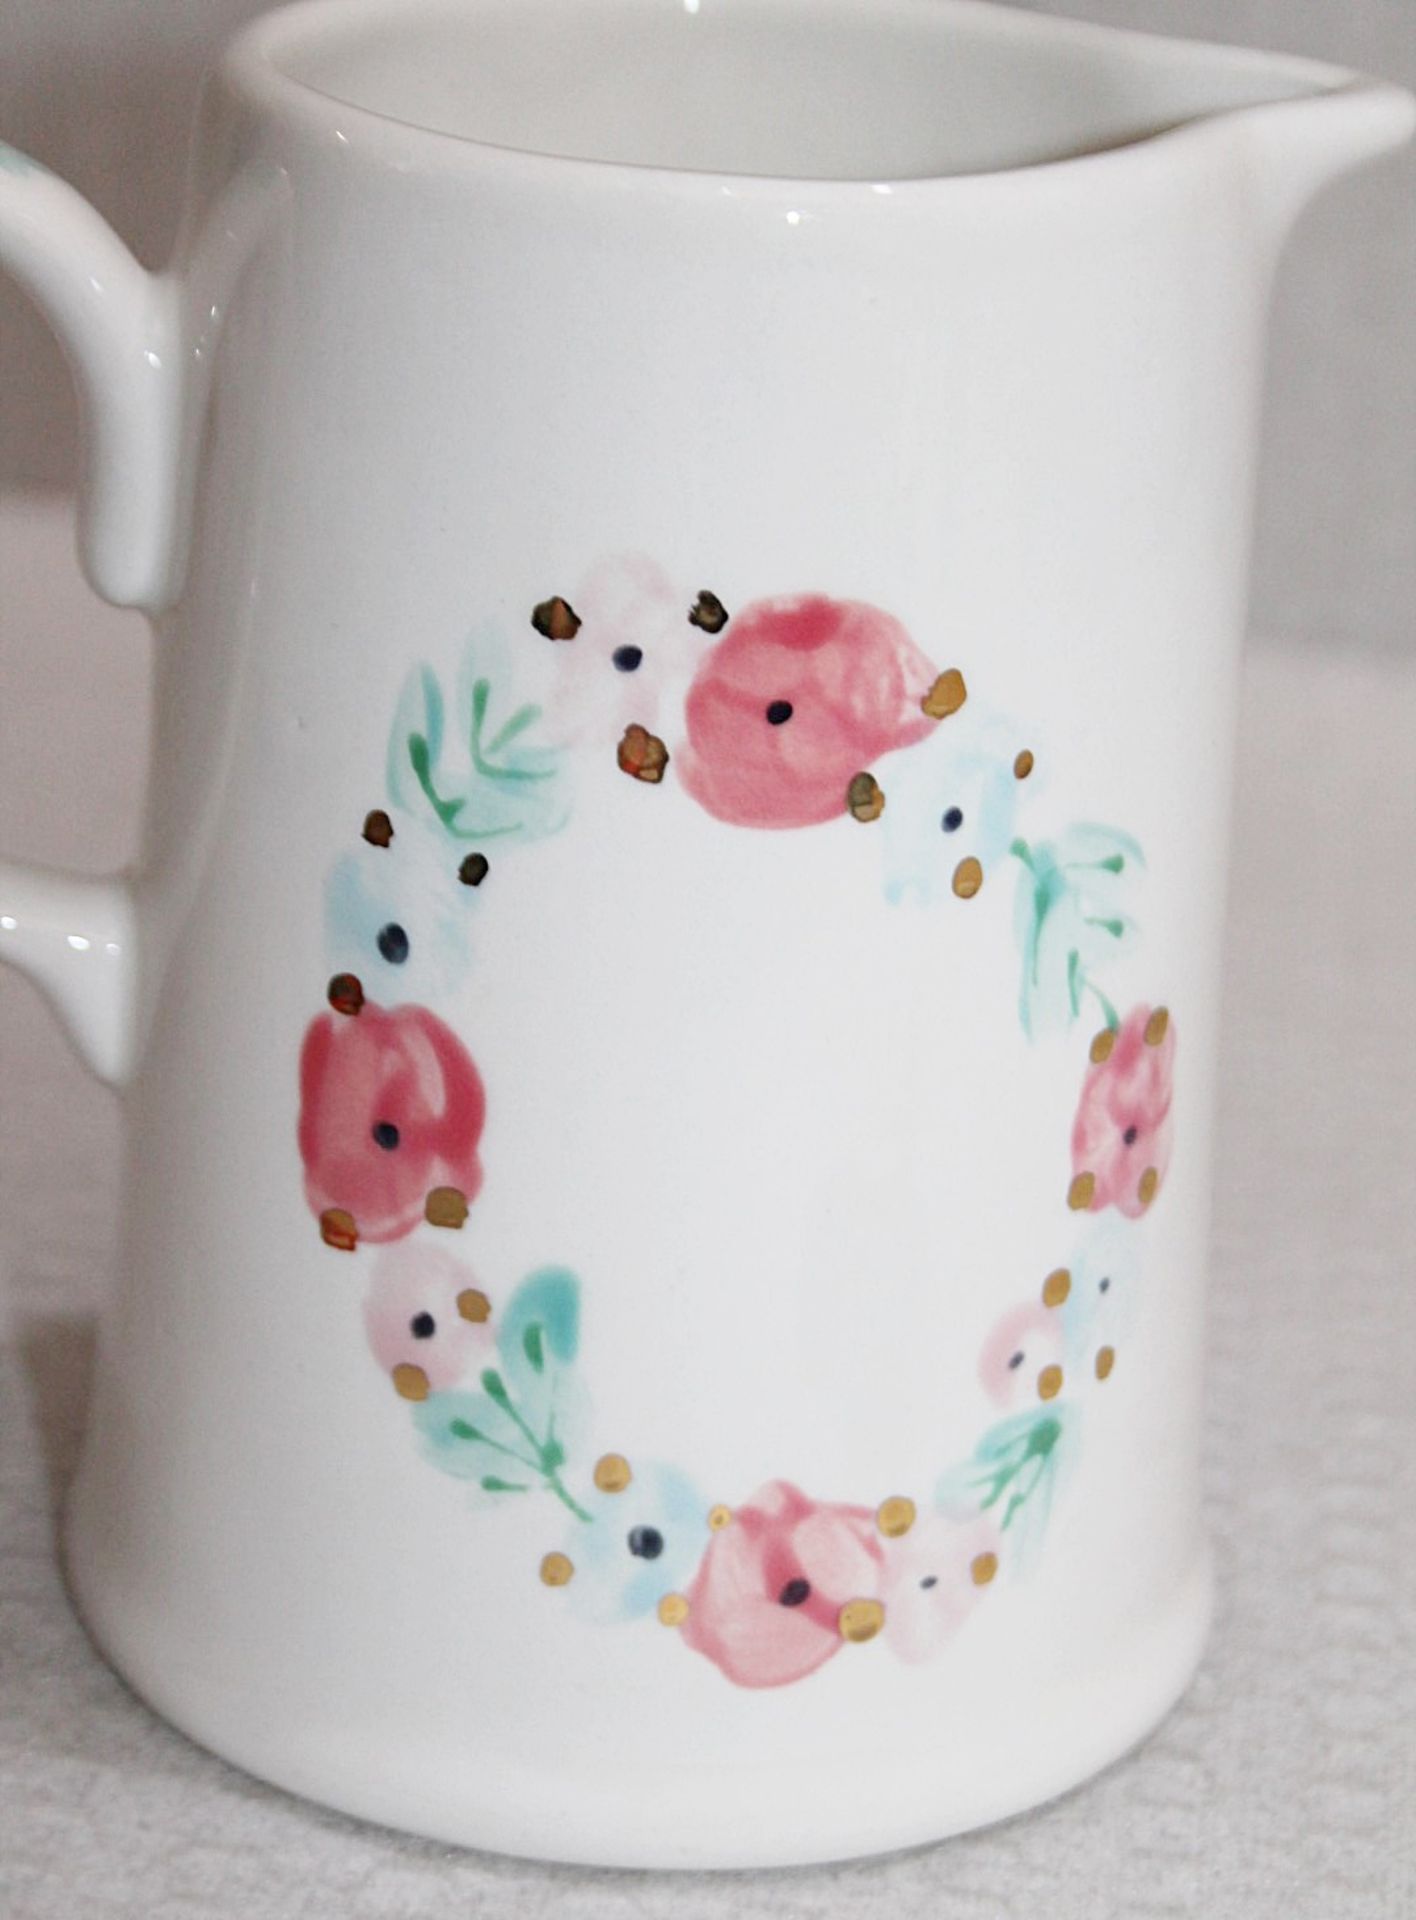 1 x Ceramic Handpainted Jug With Gilded Edging - Ex-Display Item From A London Department Store - - Image 6 of 7